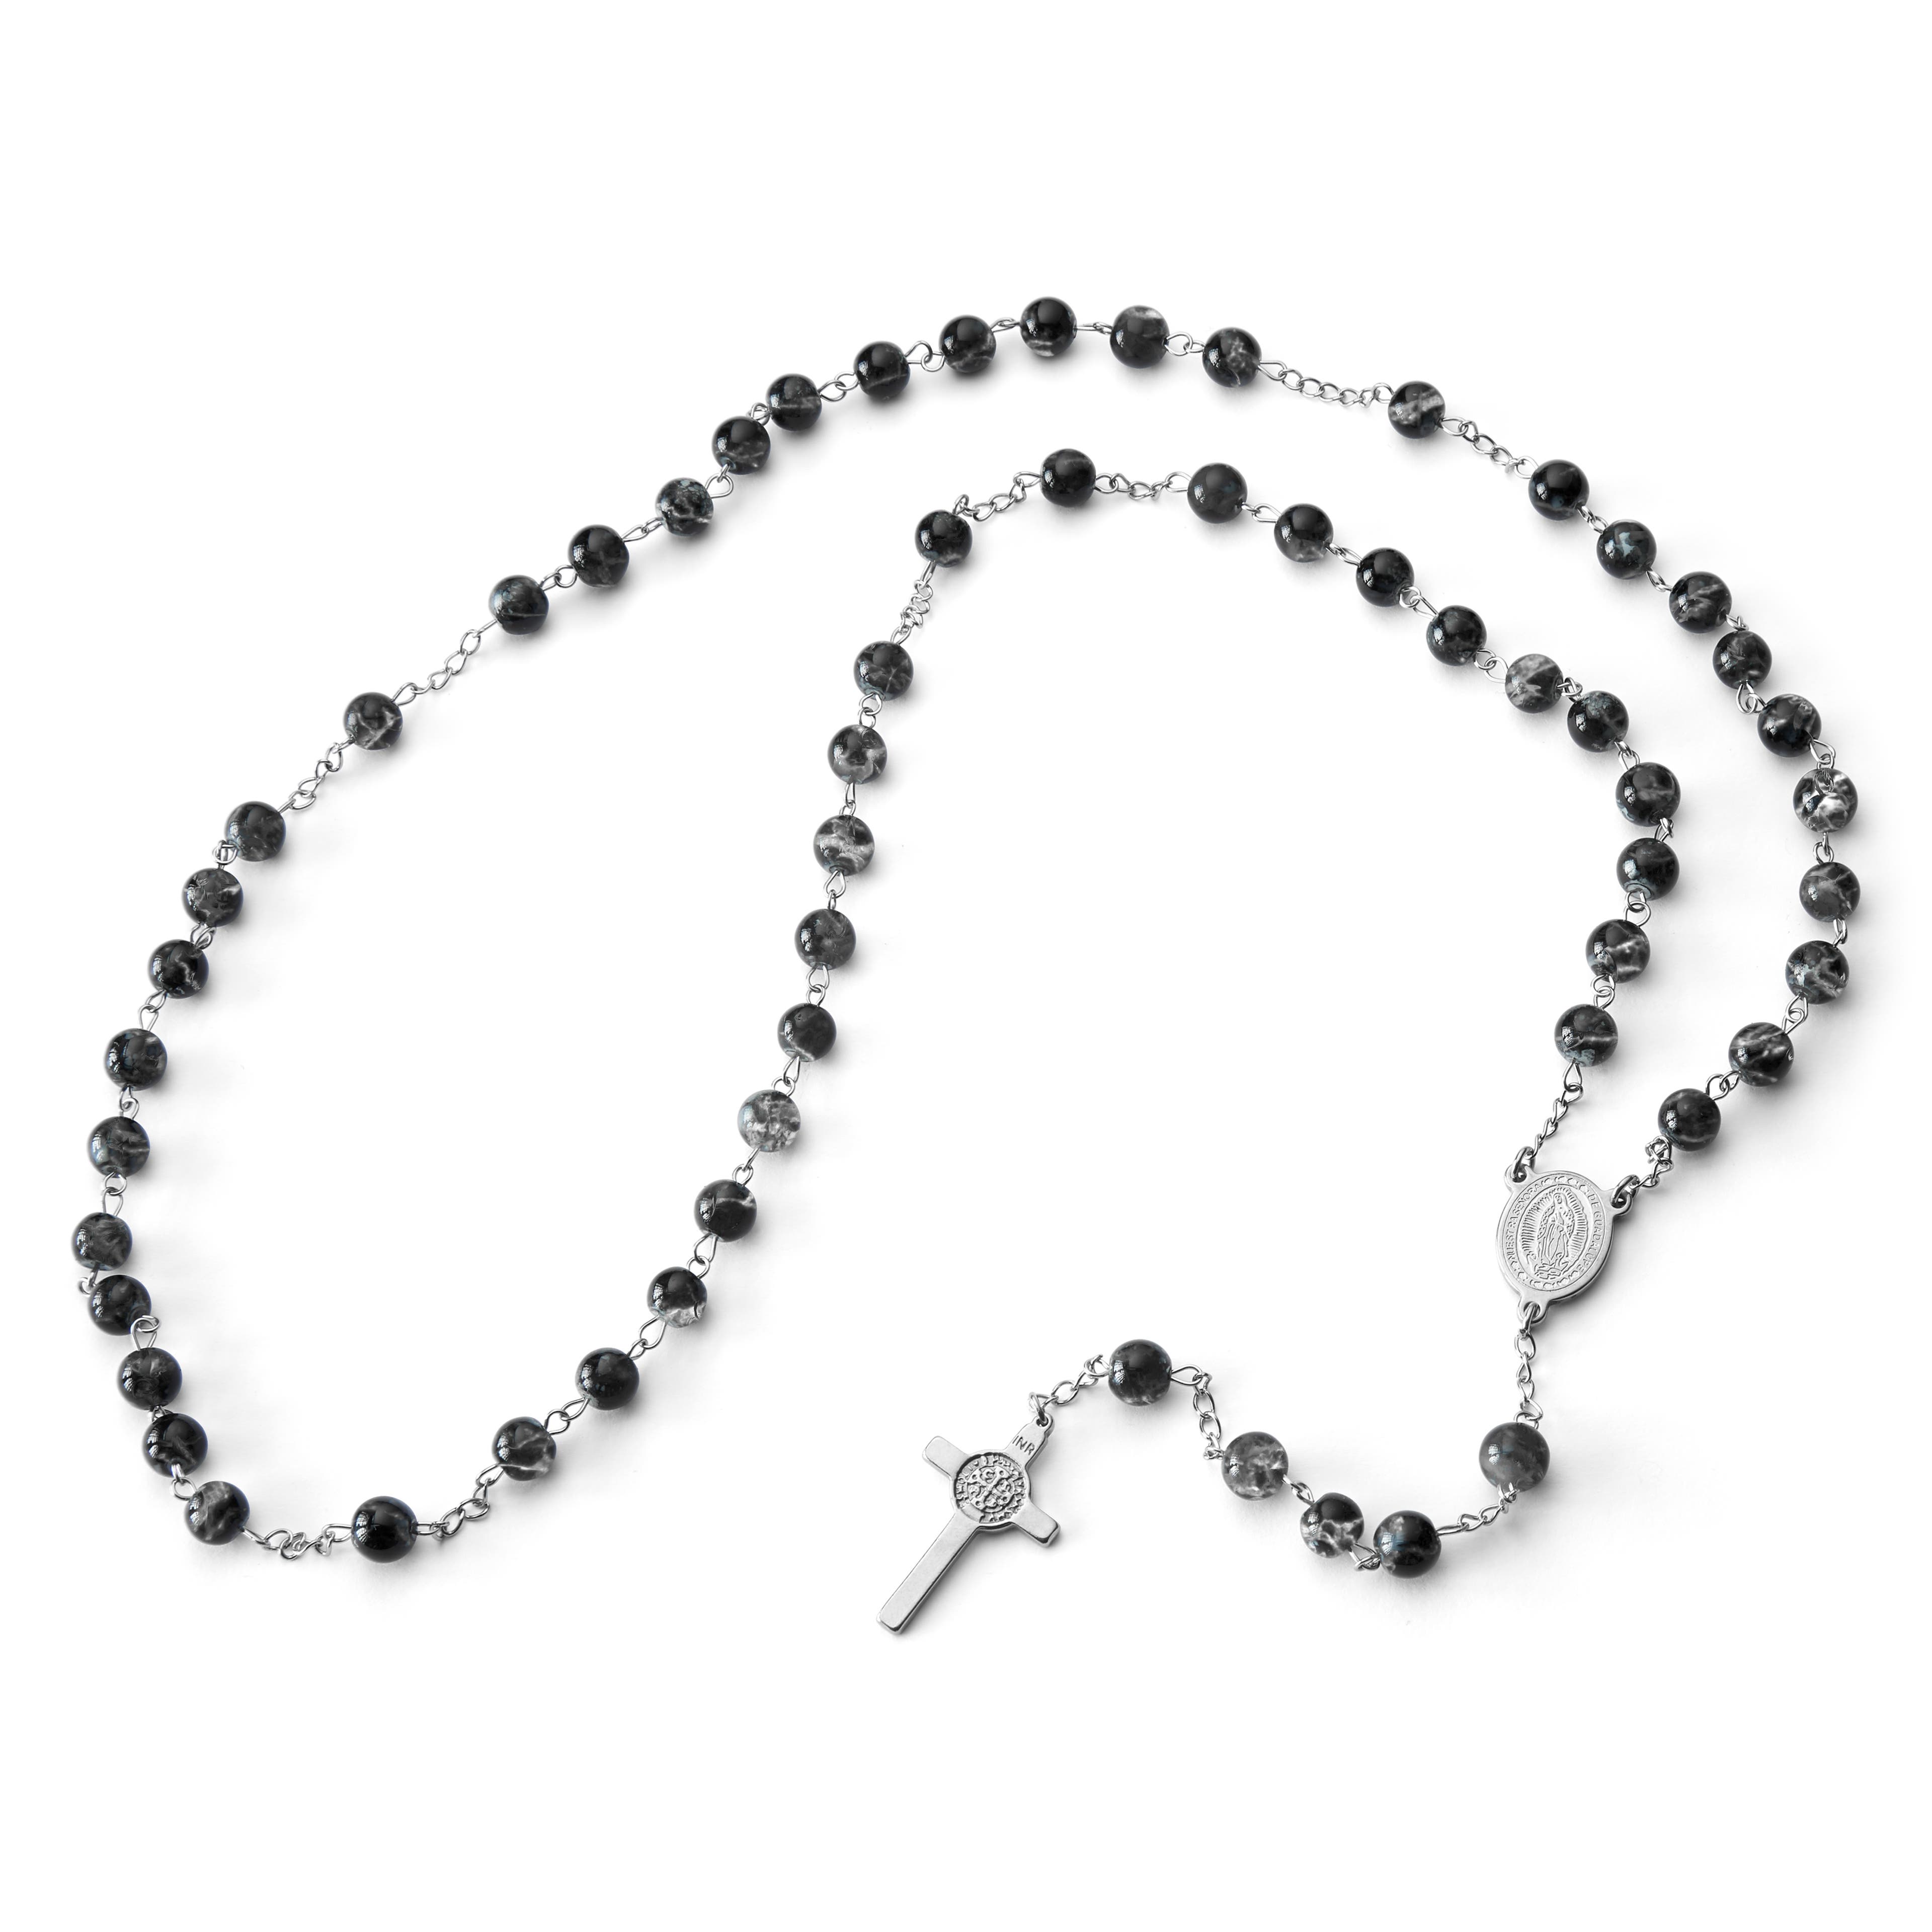 Our Lady of Guadalupe Black Rosary Necklace 